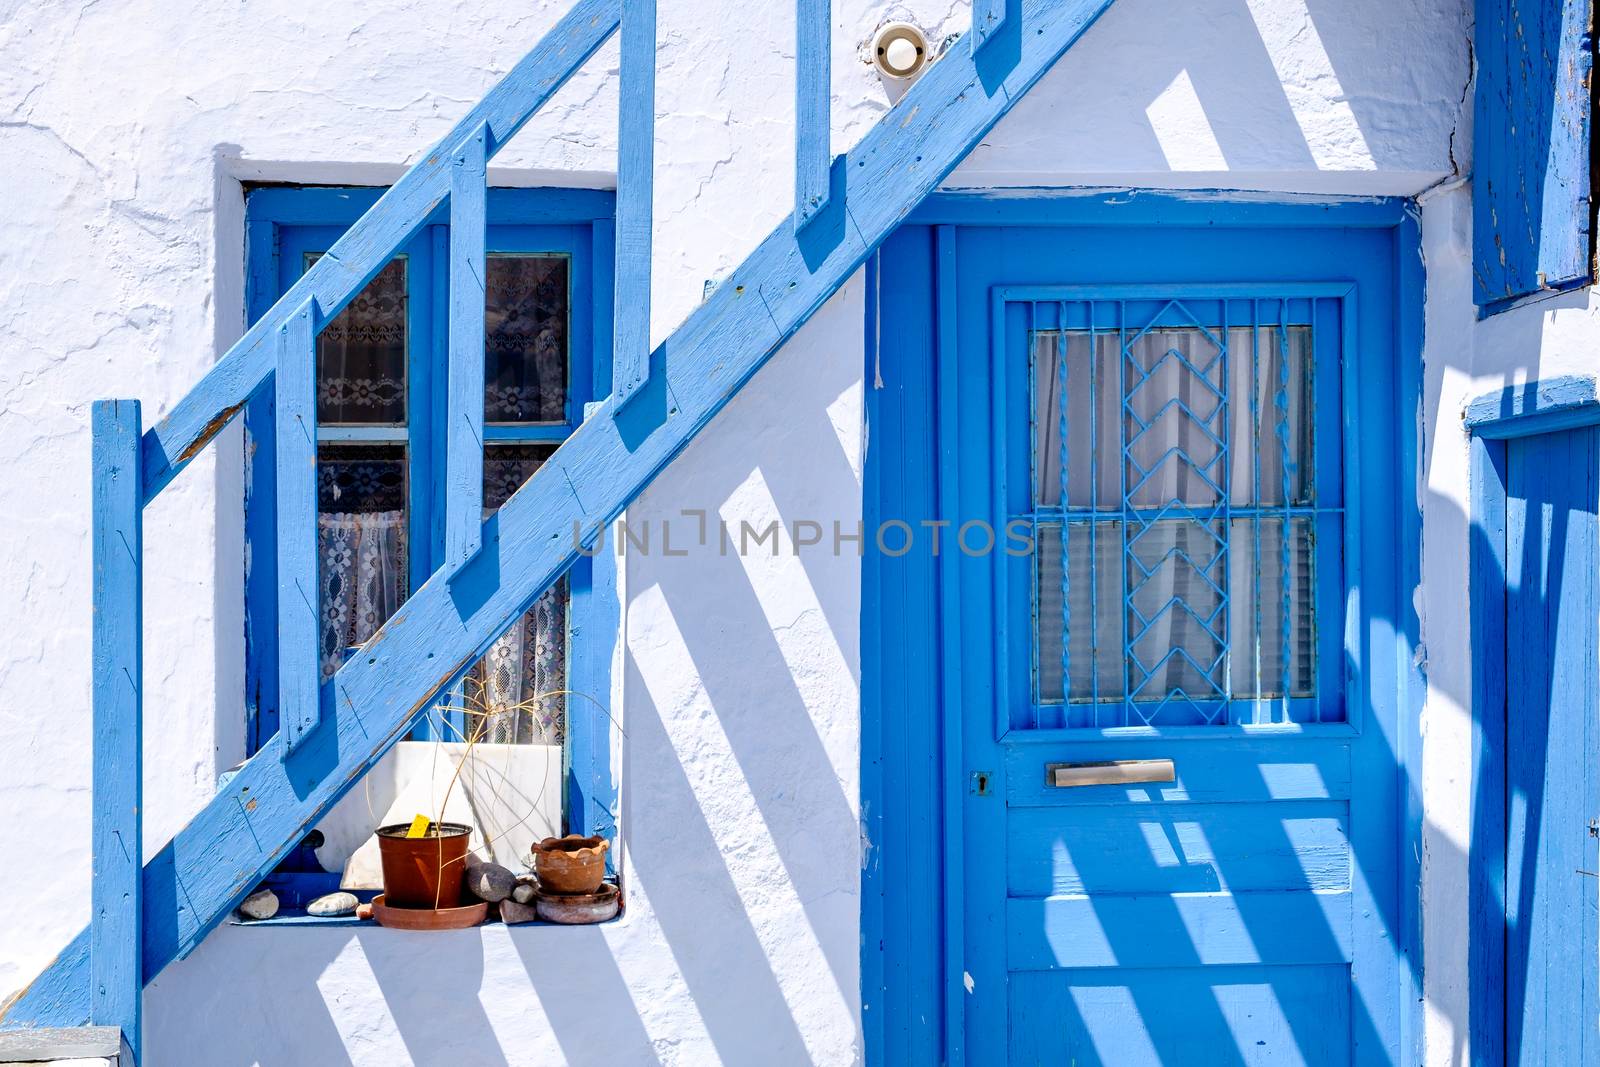 Detail of typical traditional doors and windows in white and blue style, Plaka village on Milos island, Greece